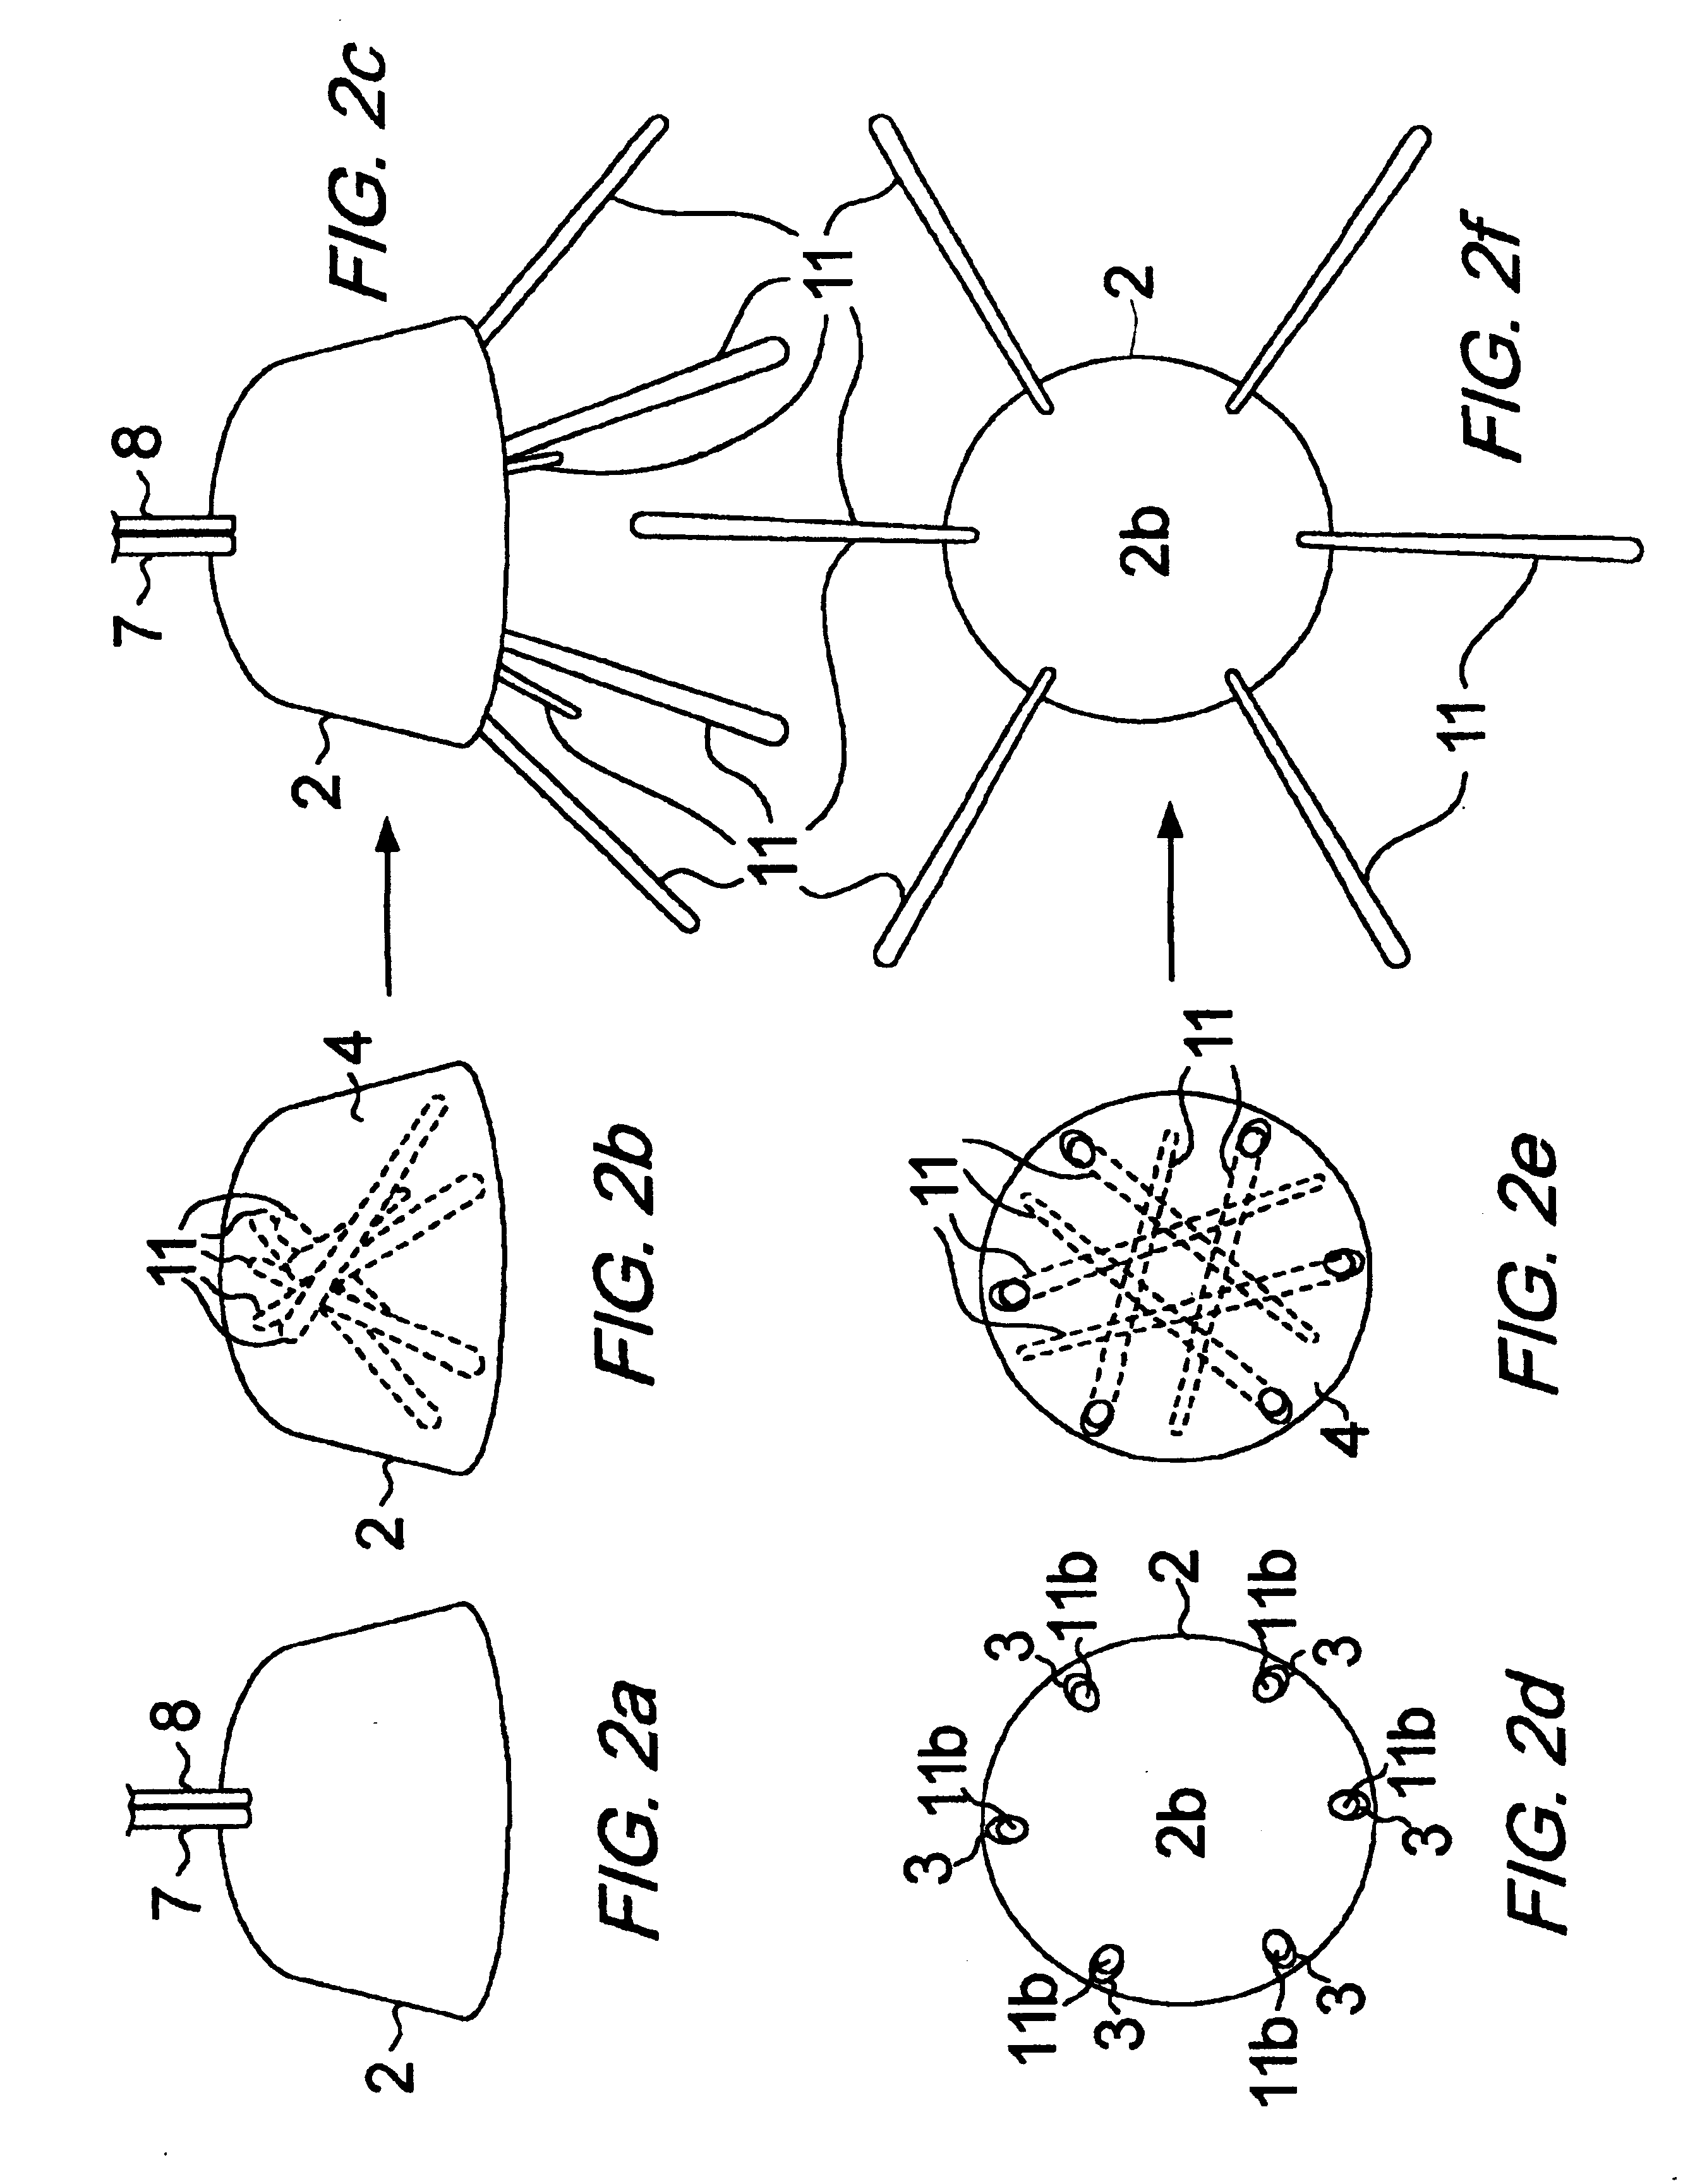 Anchoring systems and methods for anchoring an object